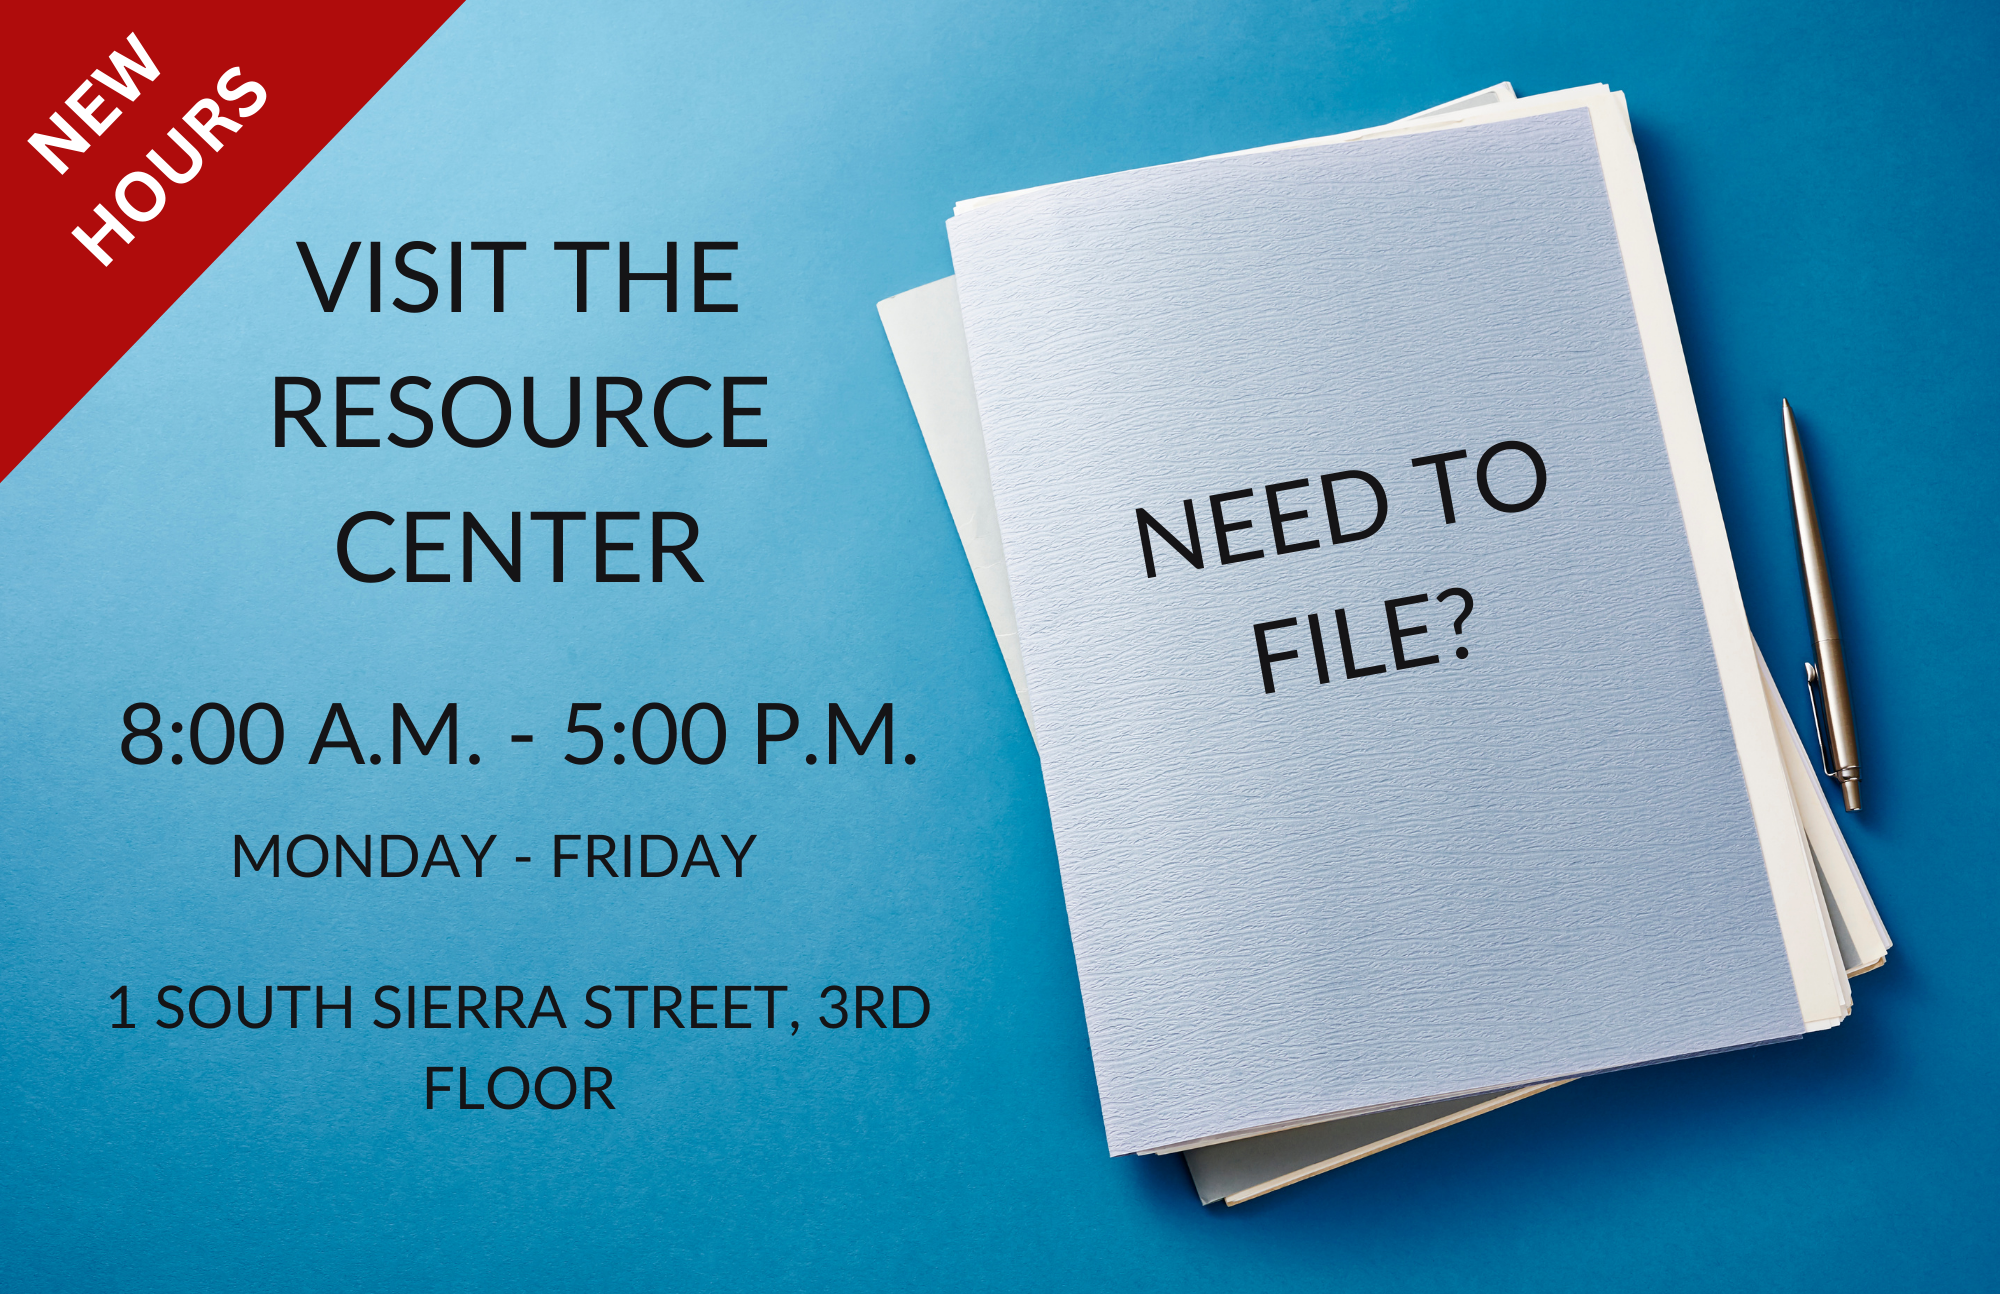 New hours for the Resource Center